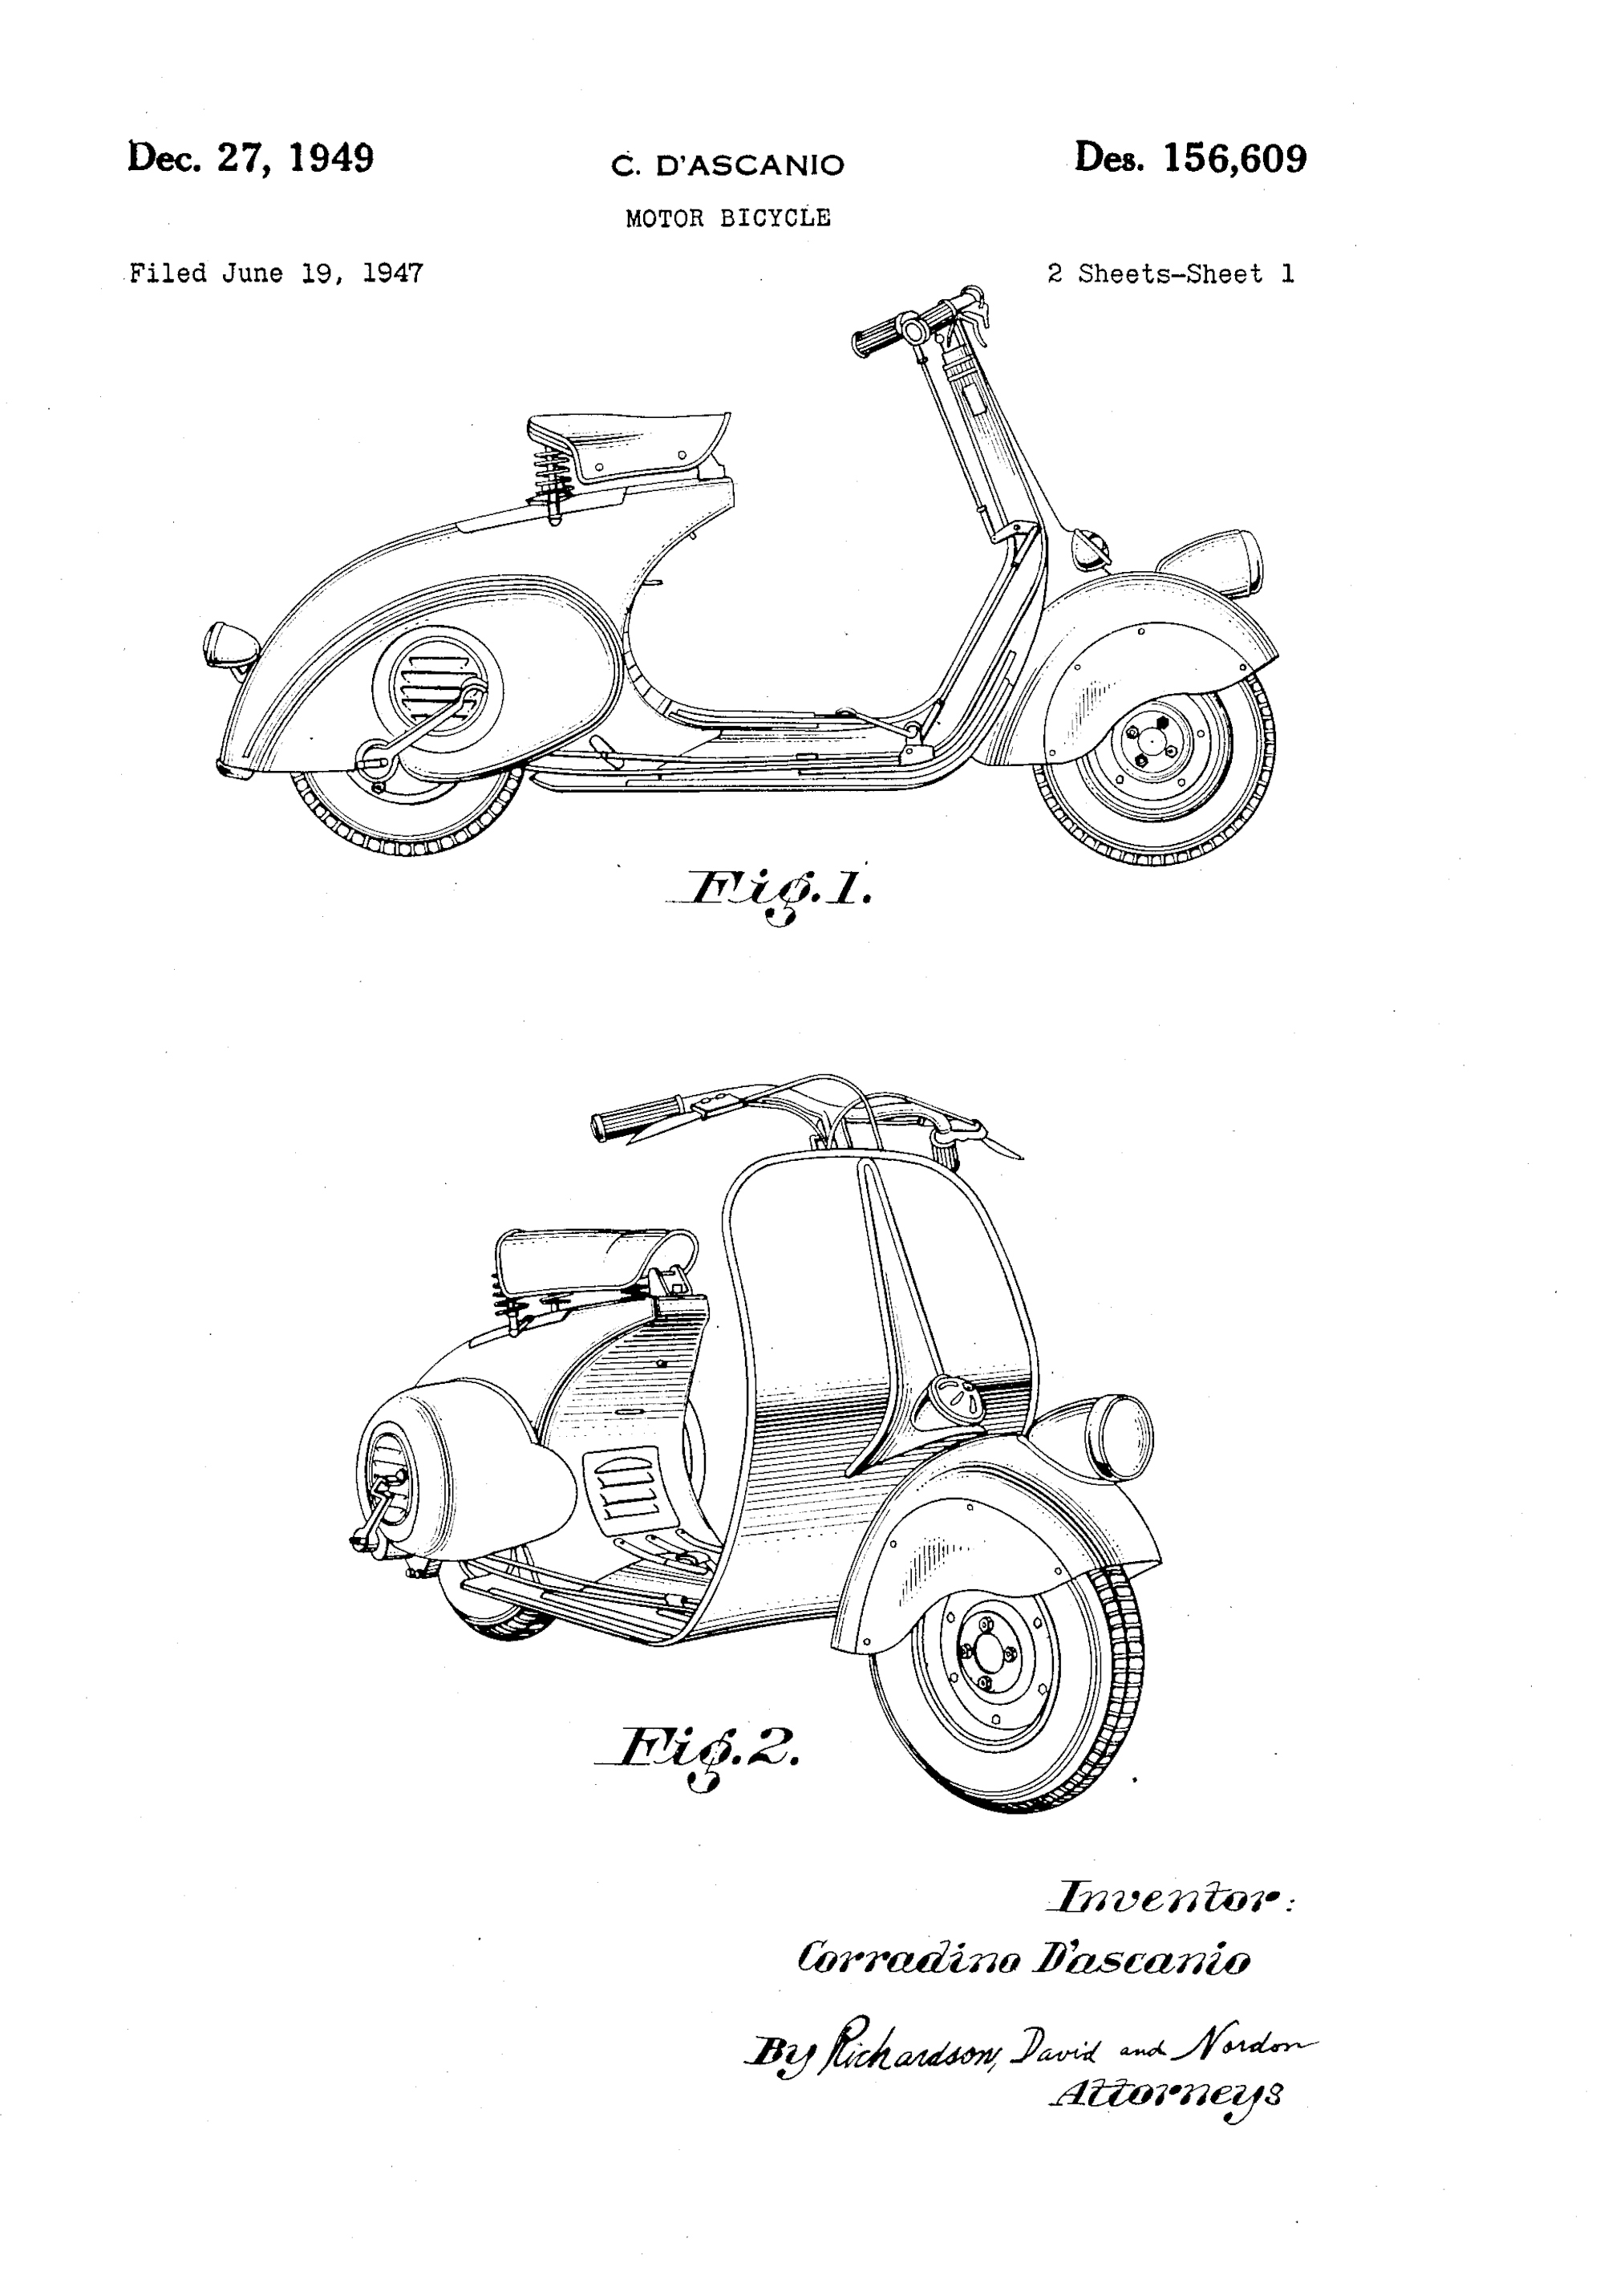 Motor Bicycle, Corradino D’Ascanio, for Piaggio, 1947/1949. Patent Number: USD 156,609, U.S. Patent Office